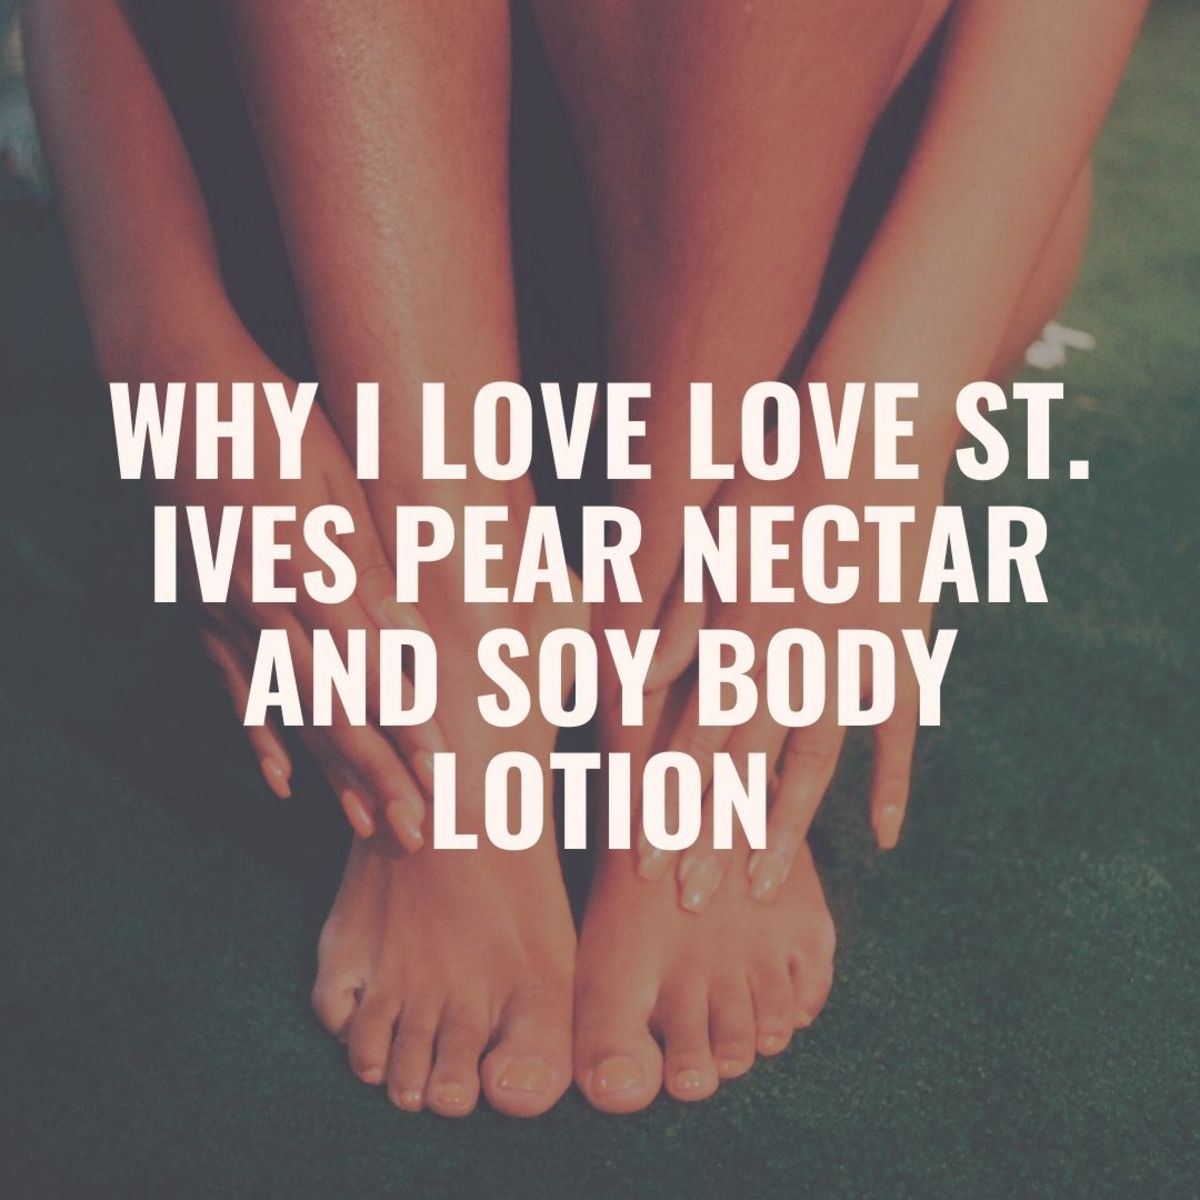 My Review of St. Ives Pear Nectar and Soy Body Lotion